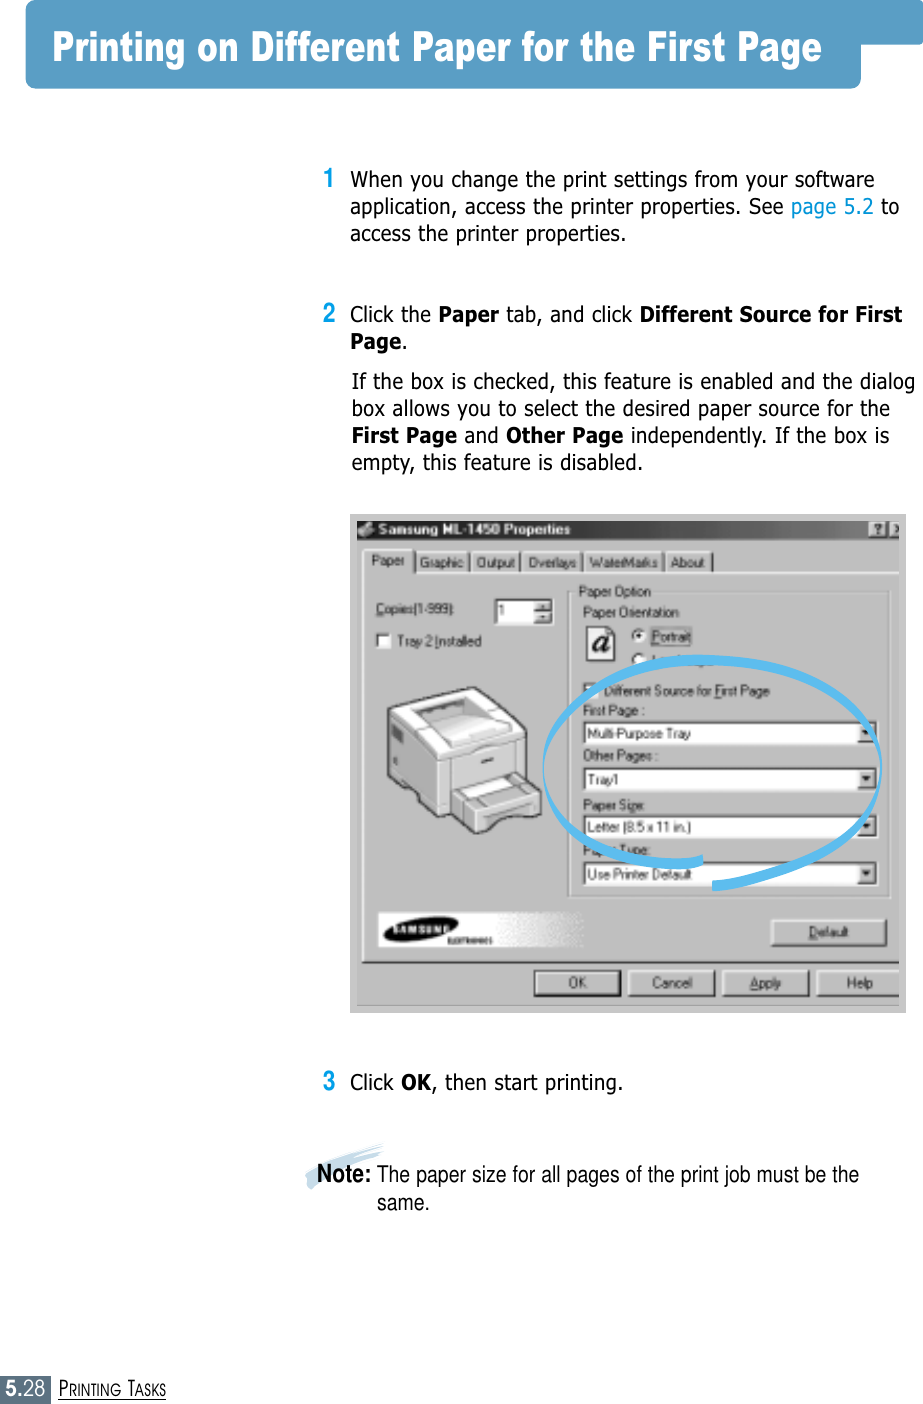 5.28PRINTING TASKSPrinting on Different Paper for the First Page1When you change the print settings from your softwareapplication, access the printer properties. See page 5.2 toaccess the printer properties.2Click the Paper tab, and click Different Source for FirstPage. If the box is checked, this feature is enabled and the dialogbox allows you to select the desired paper source for theFirst Page and Other Page independently. If the box isempty, this feature is disabled. 3Click OK, then start printing. Note: The paper size for all pages of the print job must be thesame.